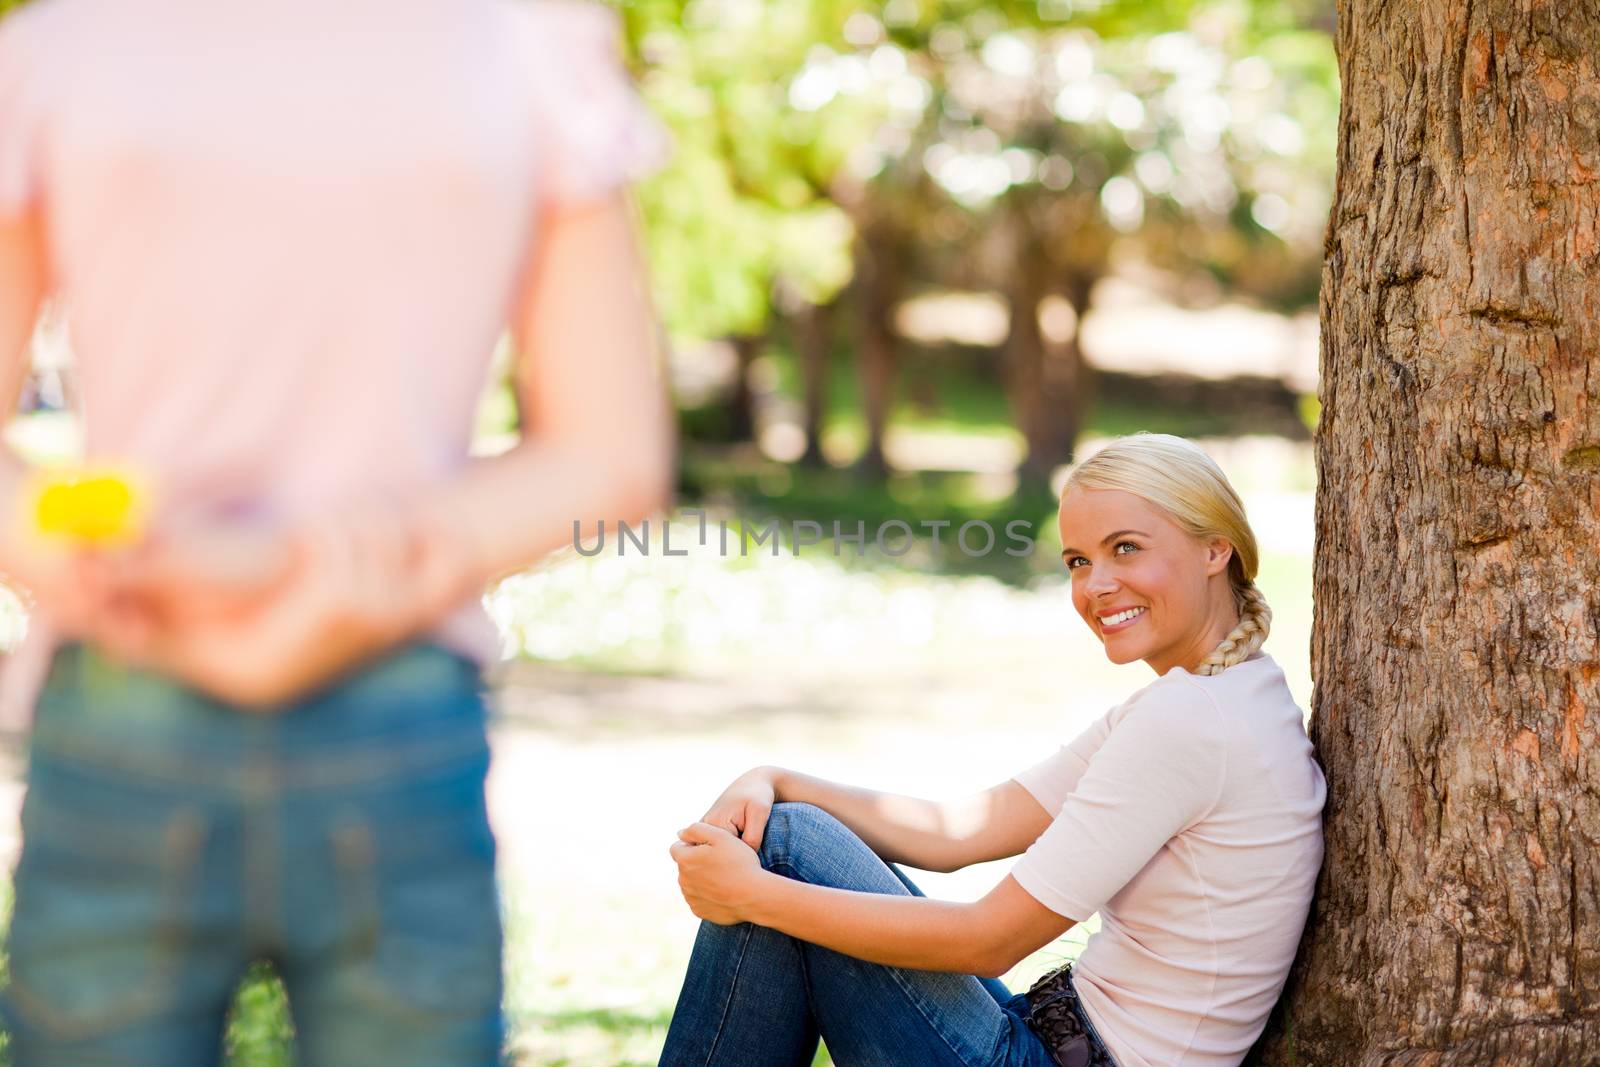 Daughter offering a flower to her mother during the summer in a park